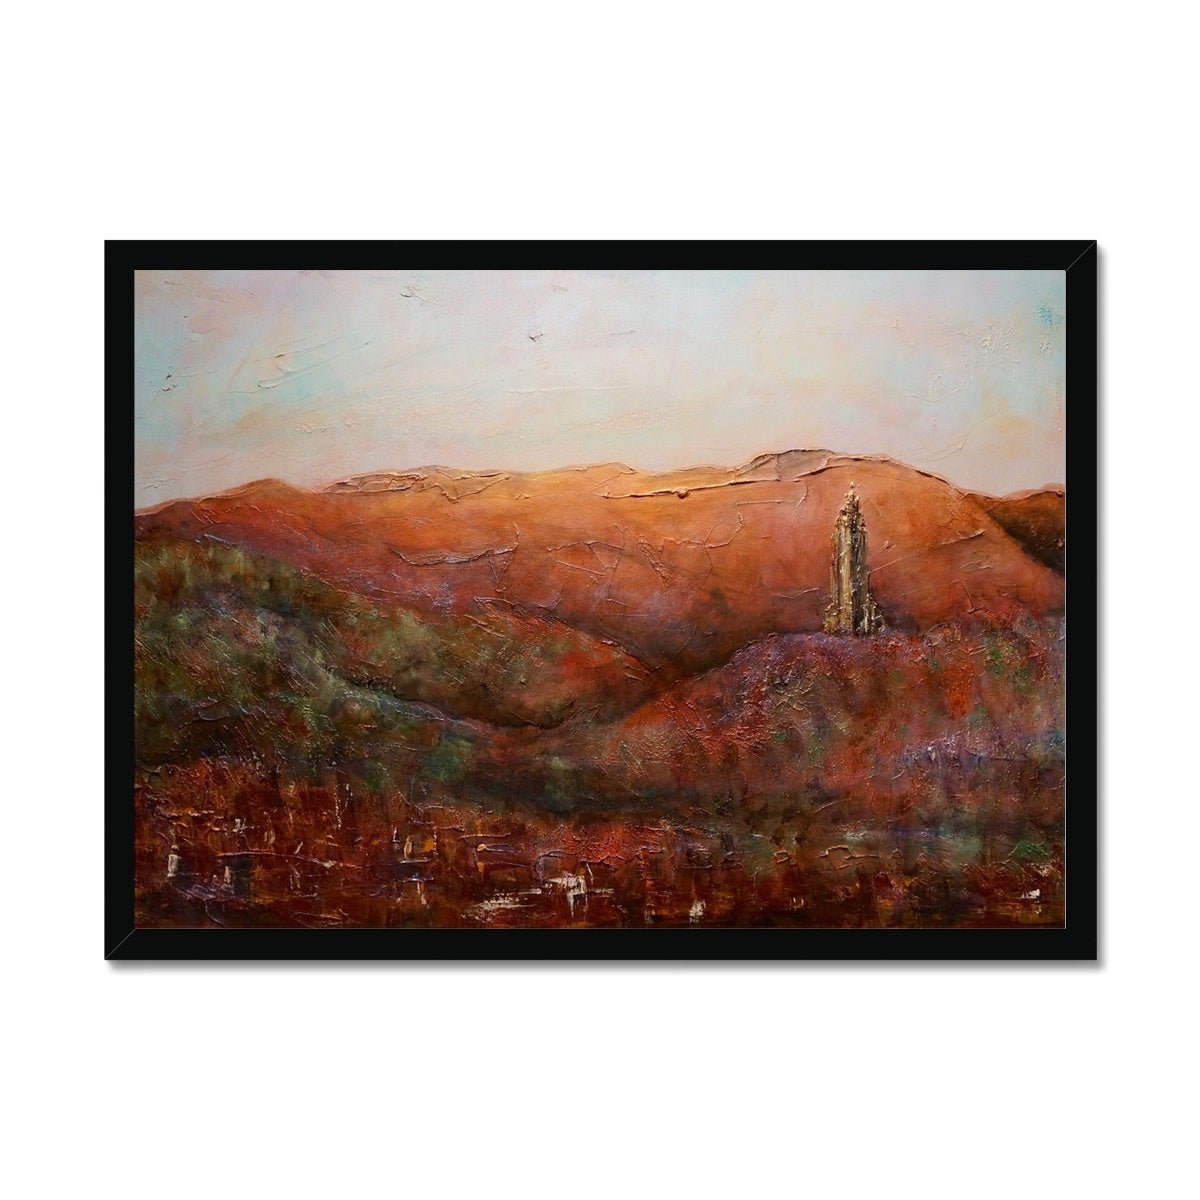 The Wallace Monument Painting | Framed Prints From Scotland-Framed Prints-Historic & Iconic Scotland Art Gallery-A2 Landscape-Black Frame-Paintings, Prints, Homeware, Art Gifts From Scotland By Scottish Artist Kevin Hunter